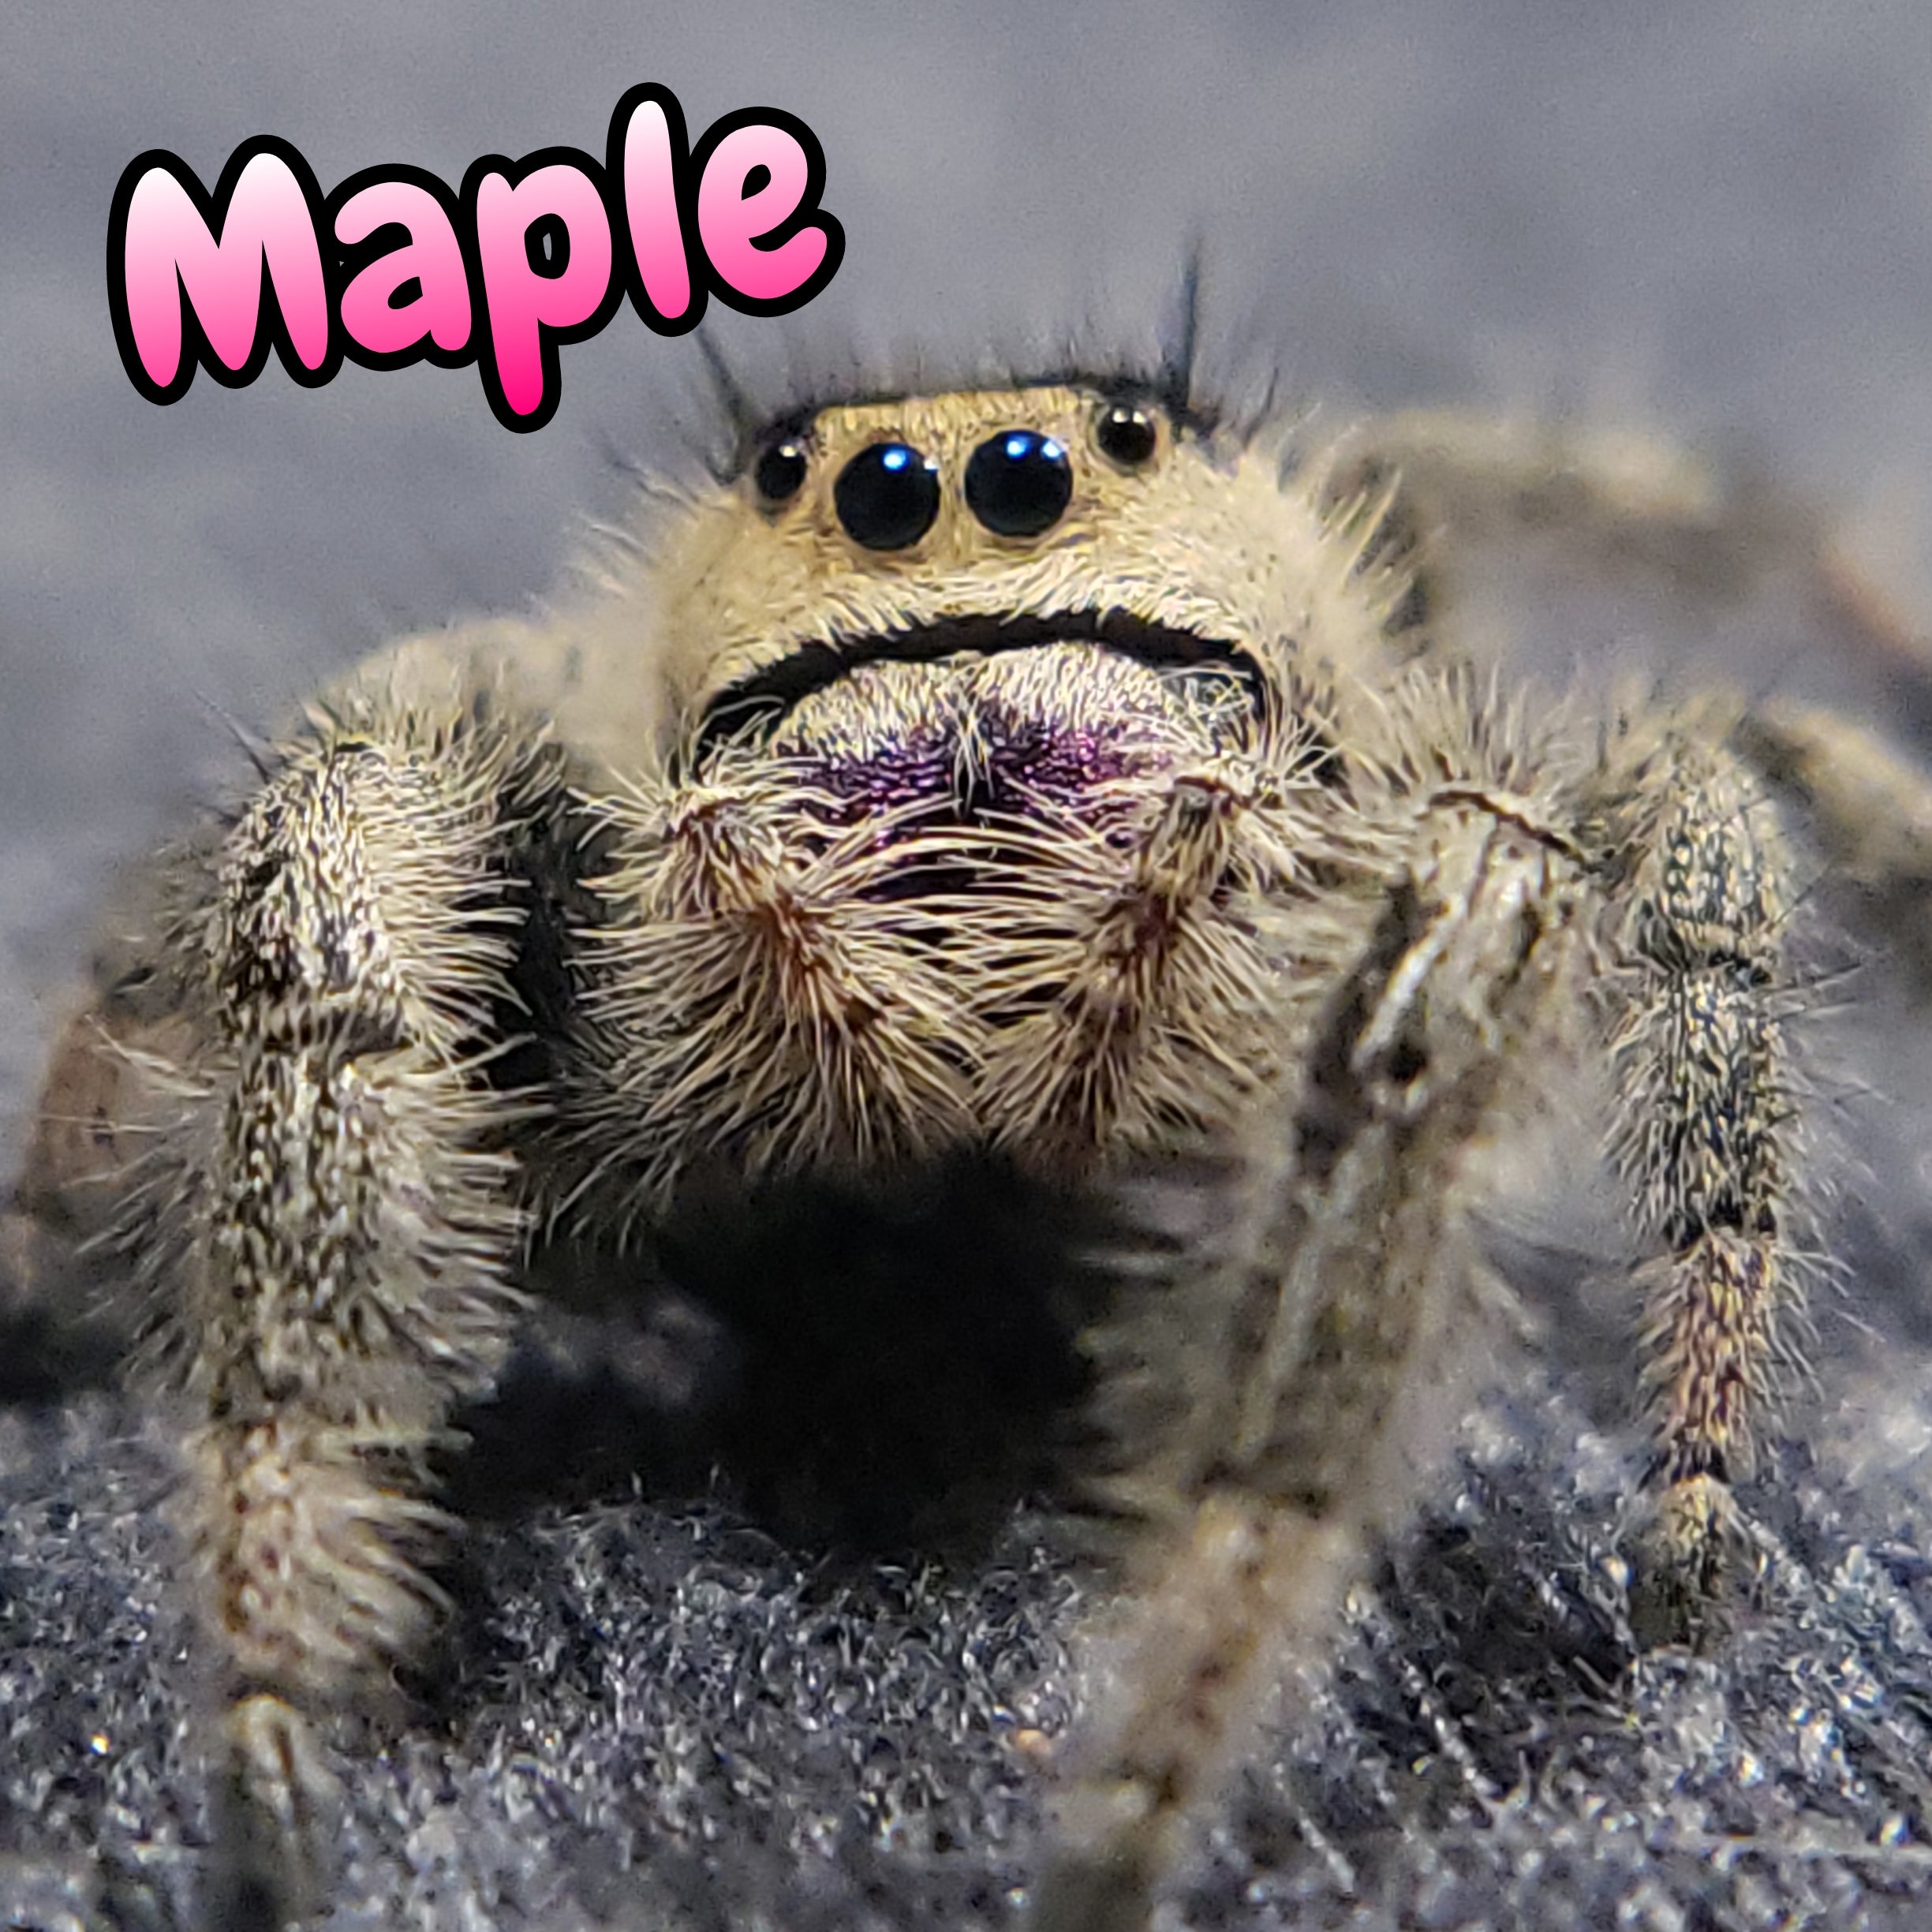 Regal Jumping Spider "Maple"